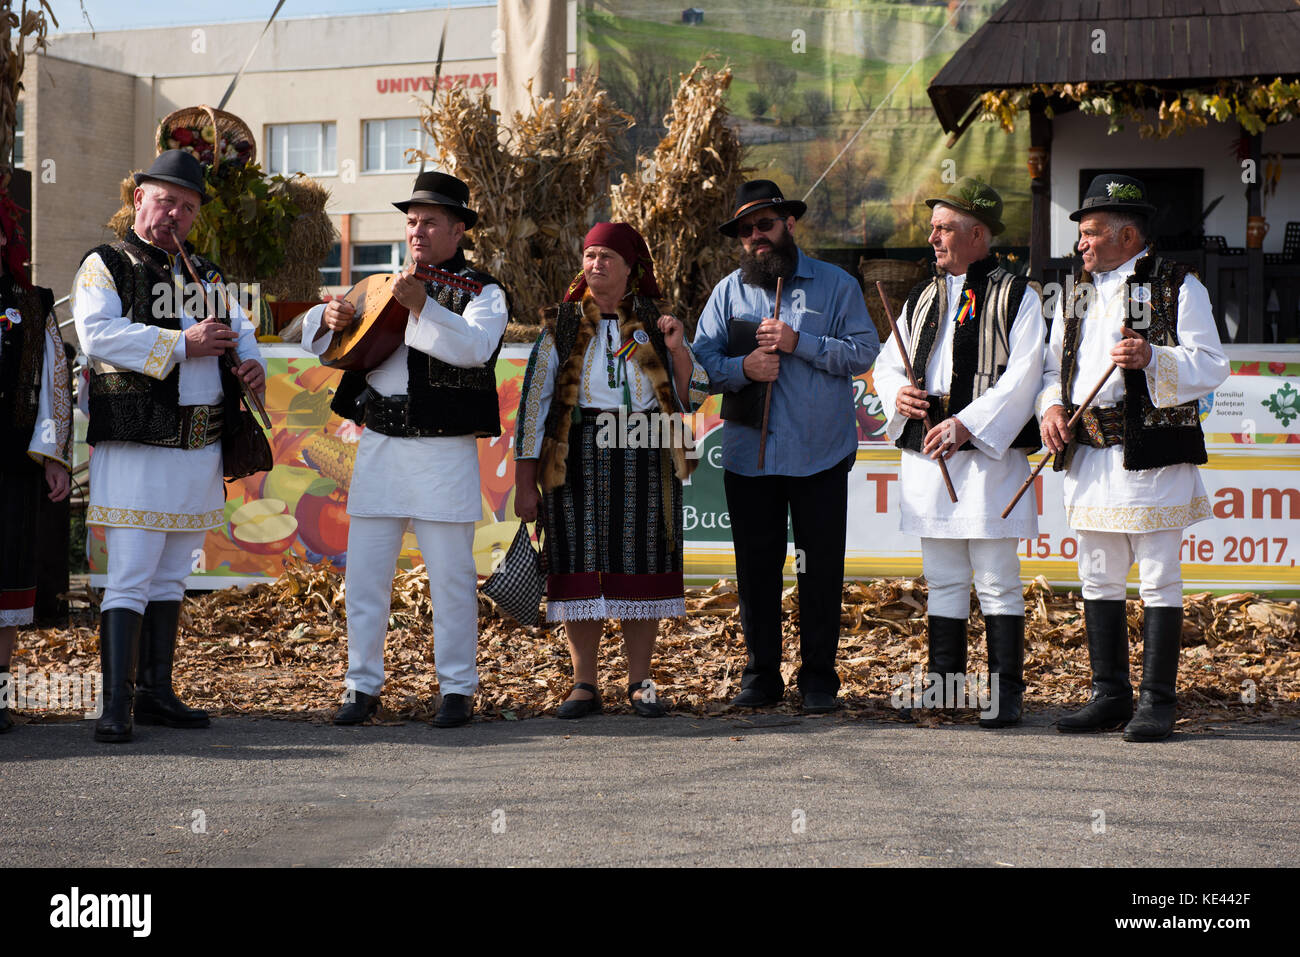 CLUJ NAPOCA, ROMANIA - OCTOBER 15, 2017: A folk band performing Romanian folk music in traditional costumes during the Autumn Fair Stock Photo